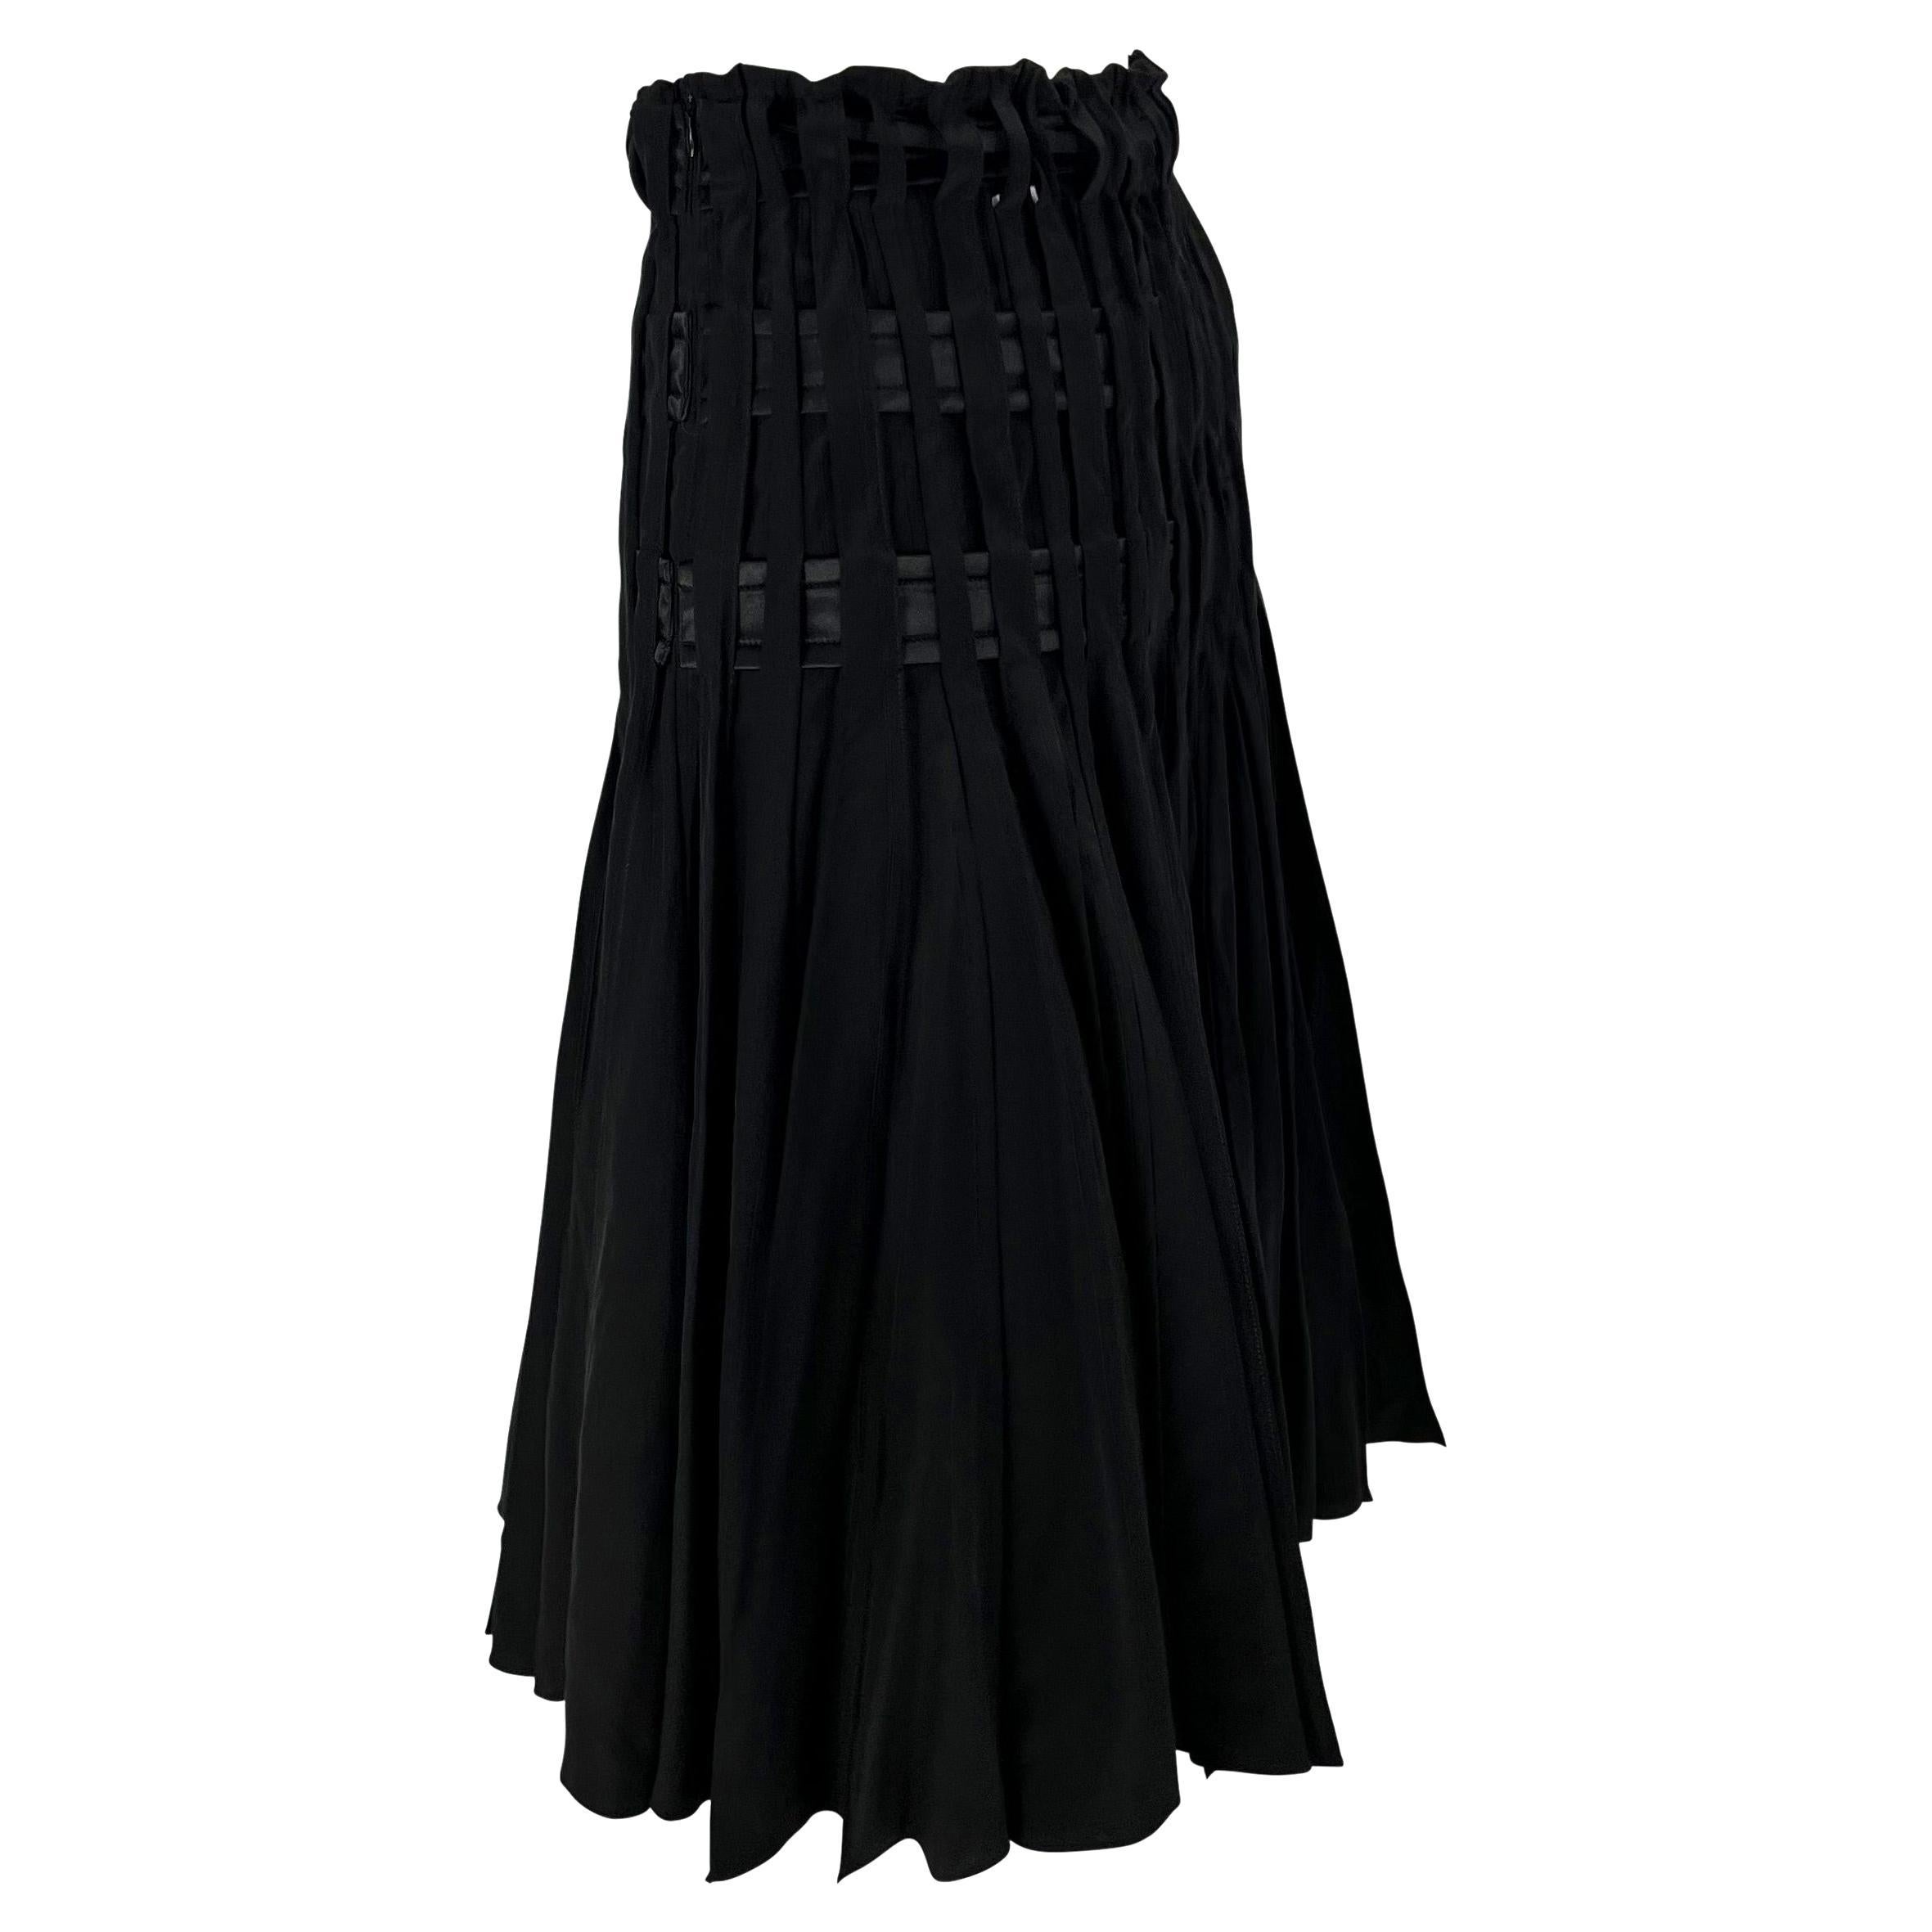 F/W 2001 Yves Saint Laurent by Tom Ford Pleated Black Satin Flare Skirt In Excellent Condition For Sale In West Hollywood, CA